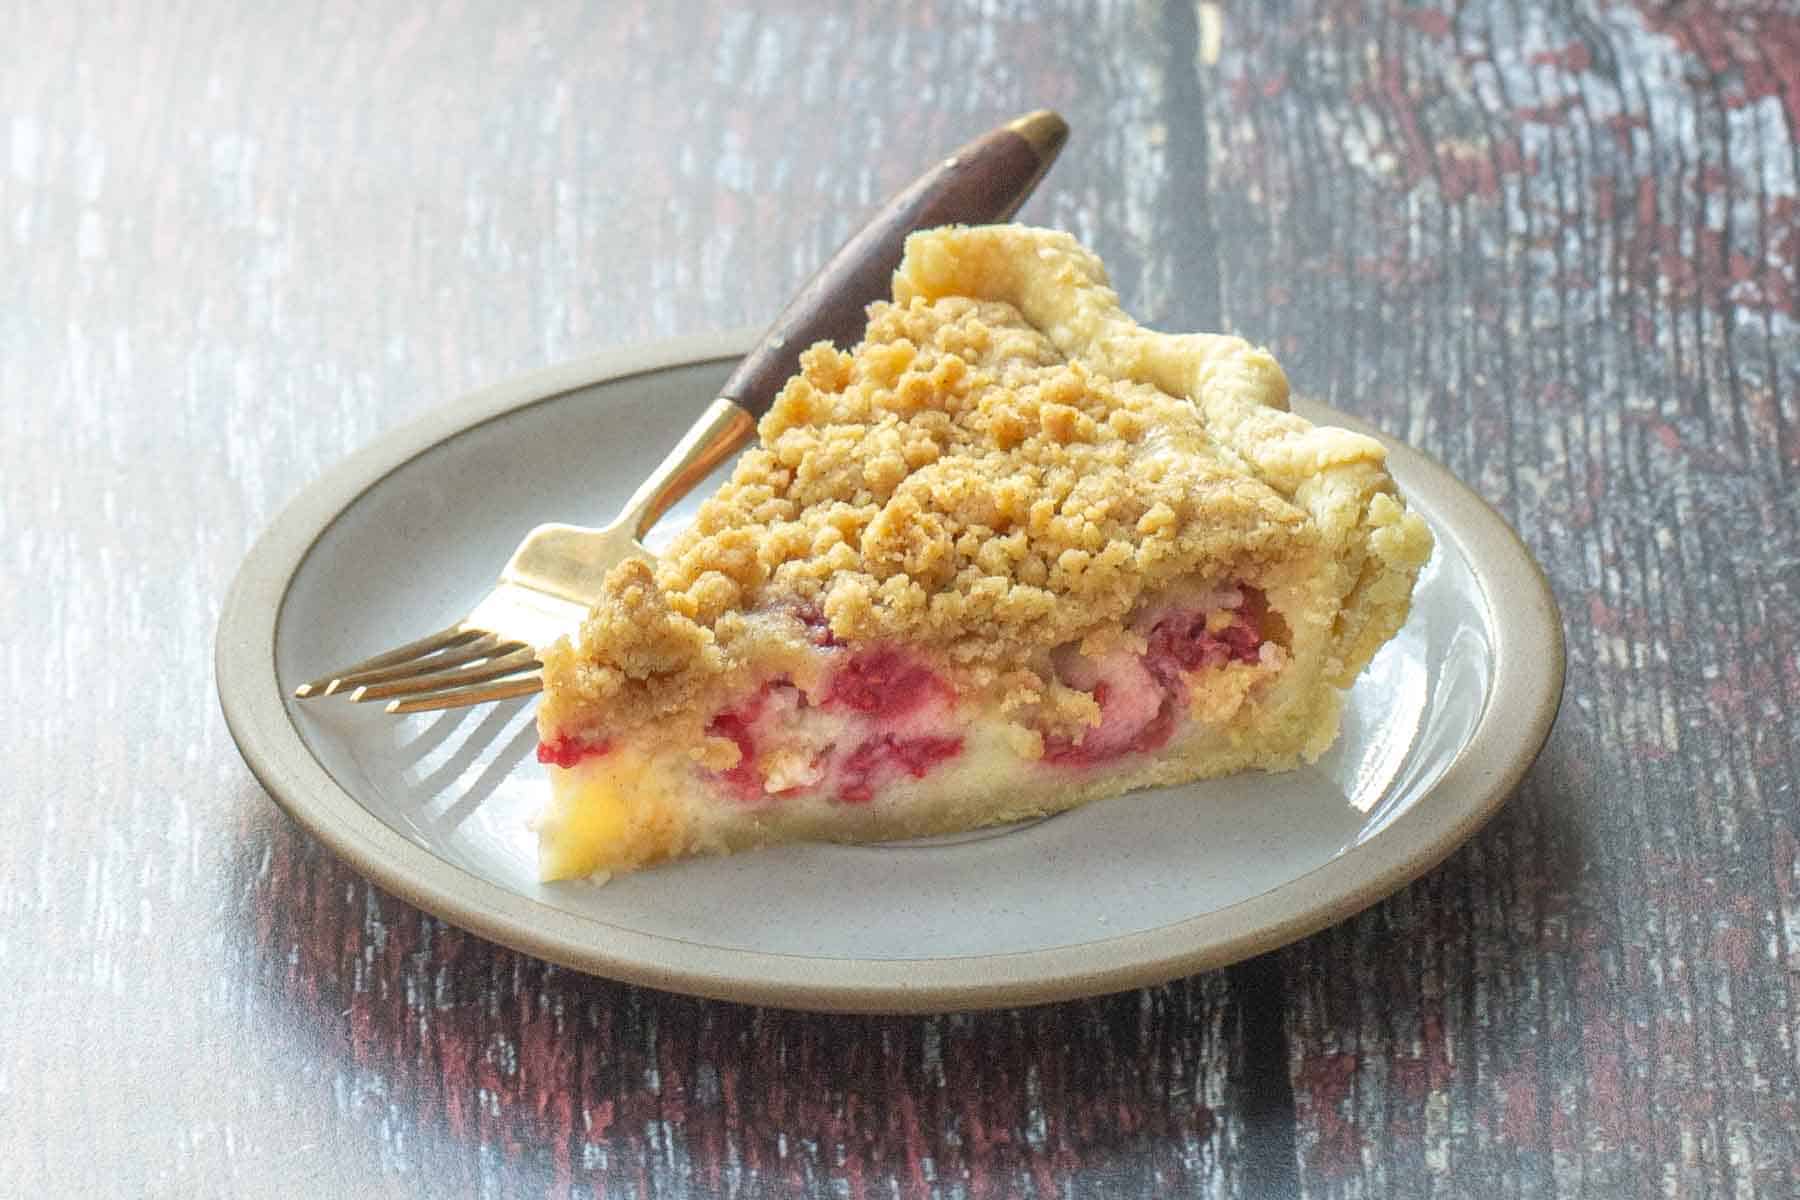 A slice of fruit crumble pie on a plate with a fork, featuring a crumbly top and visible fruit pieces inside.